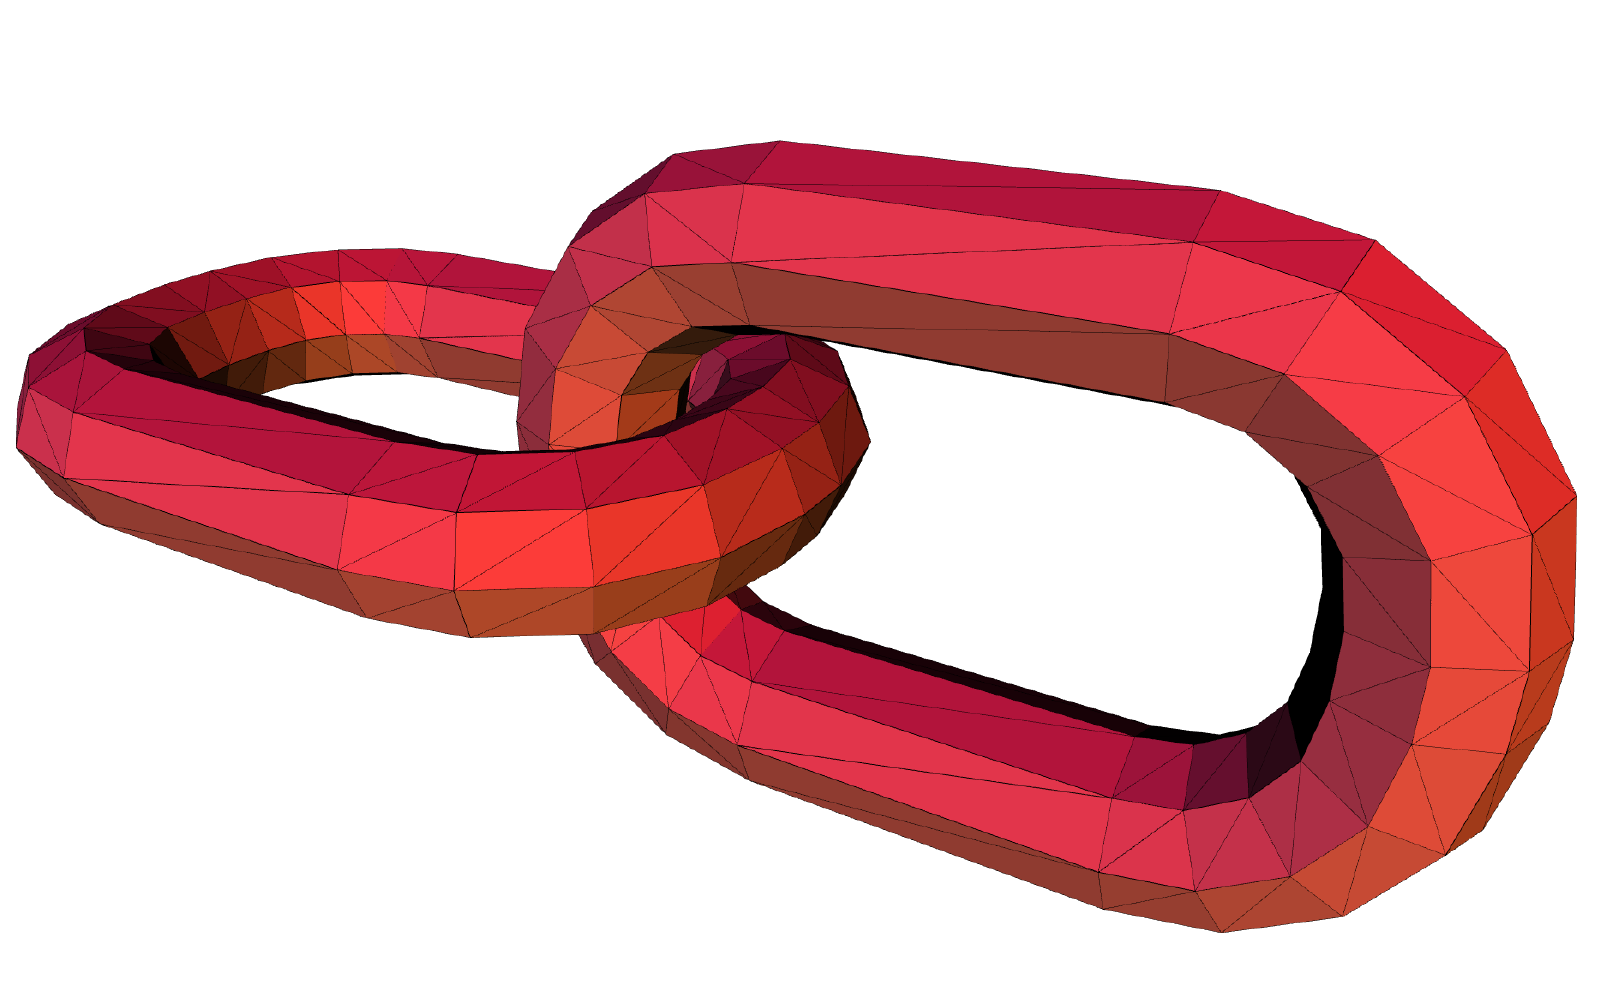 3D Model of a Chain Link For Drawing Reference